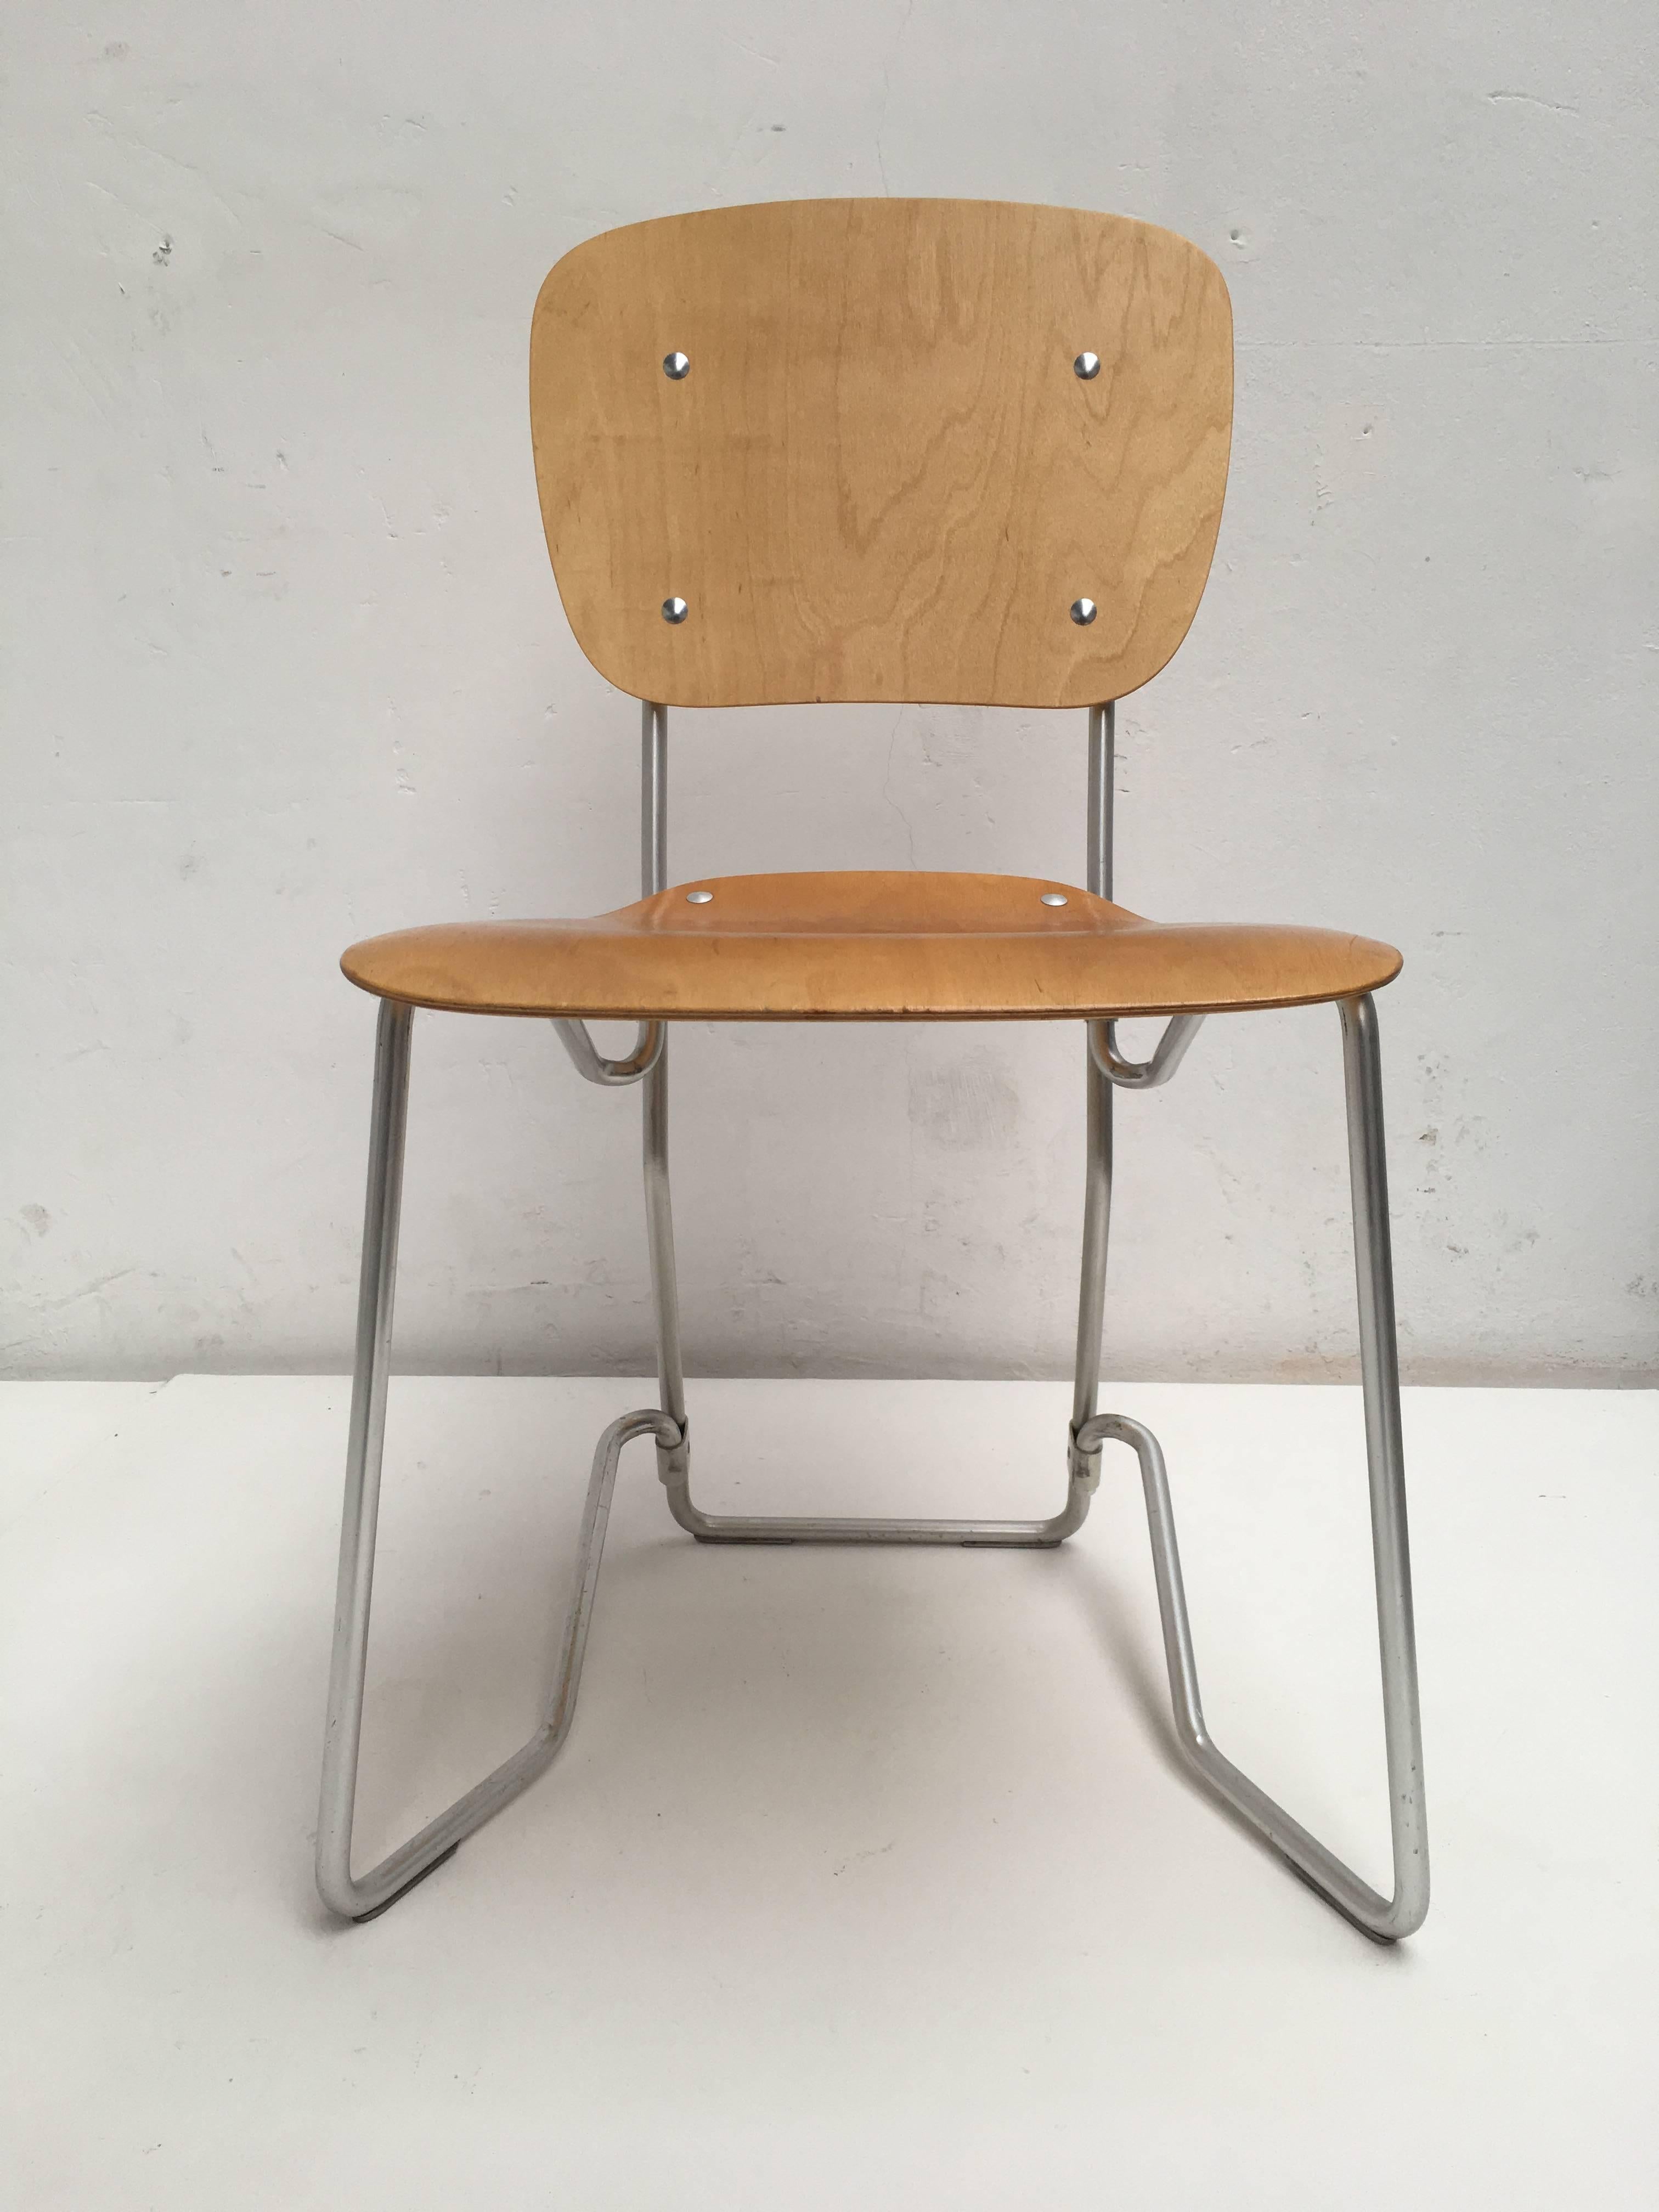 Large set of 12 Swiss "Aluflex" chairs by Armin Wirth and produced by Aluflex, Switzerland

This ingenious lightweight chair is made out of an aluminium frame and thin birch plywood seat and back and was originally designed in